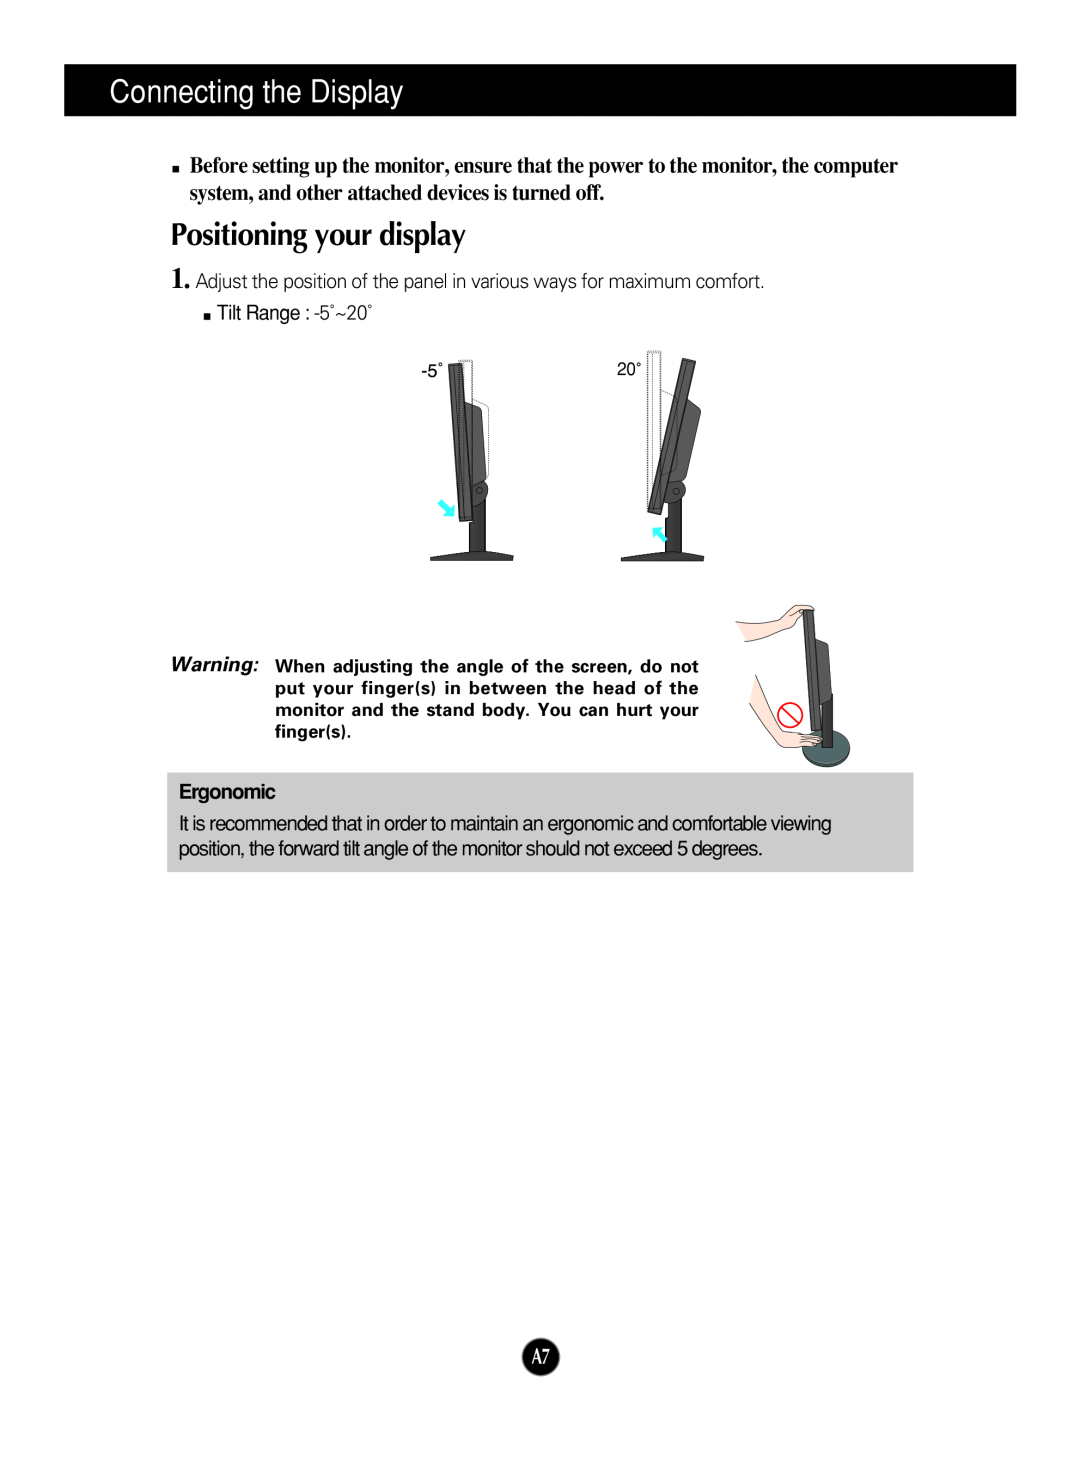 LG Electronics L1919SP, L1719SP manual Positioning your display, Connecting the Display, Ergonomic 